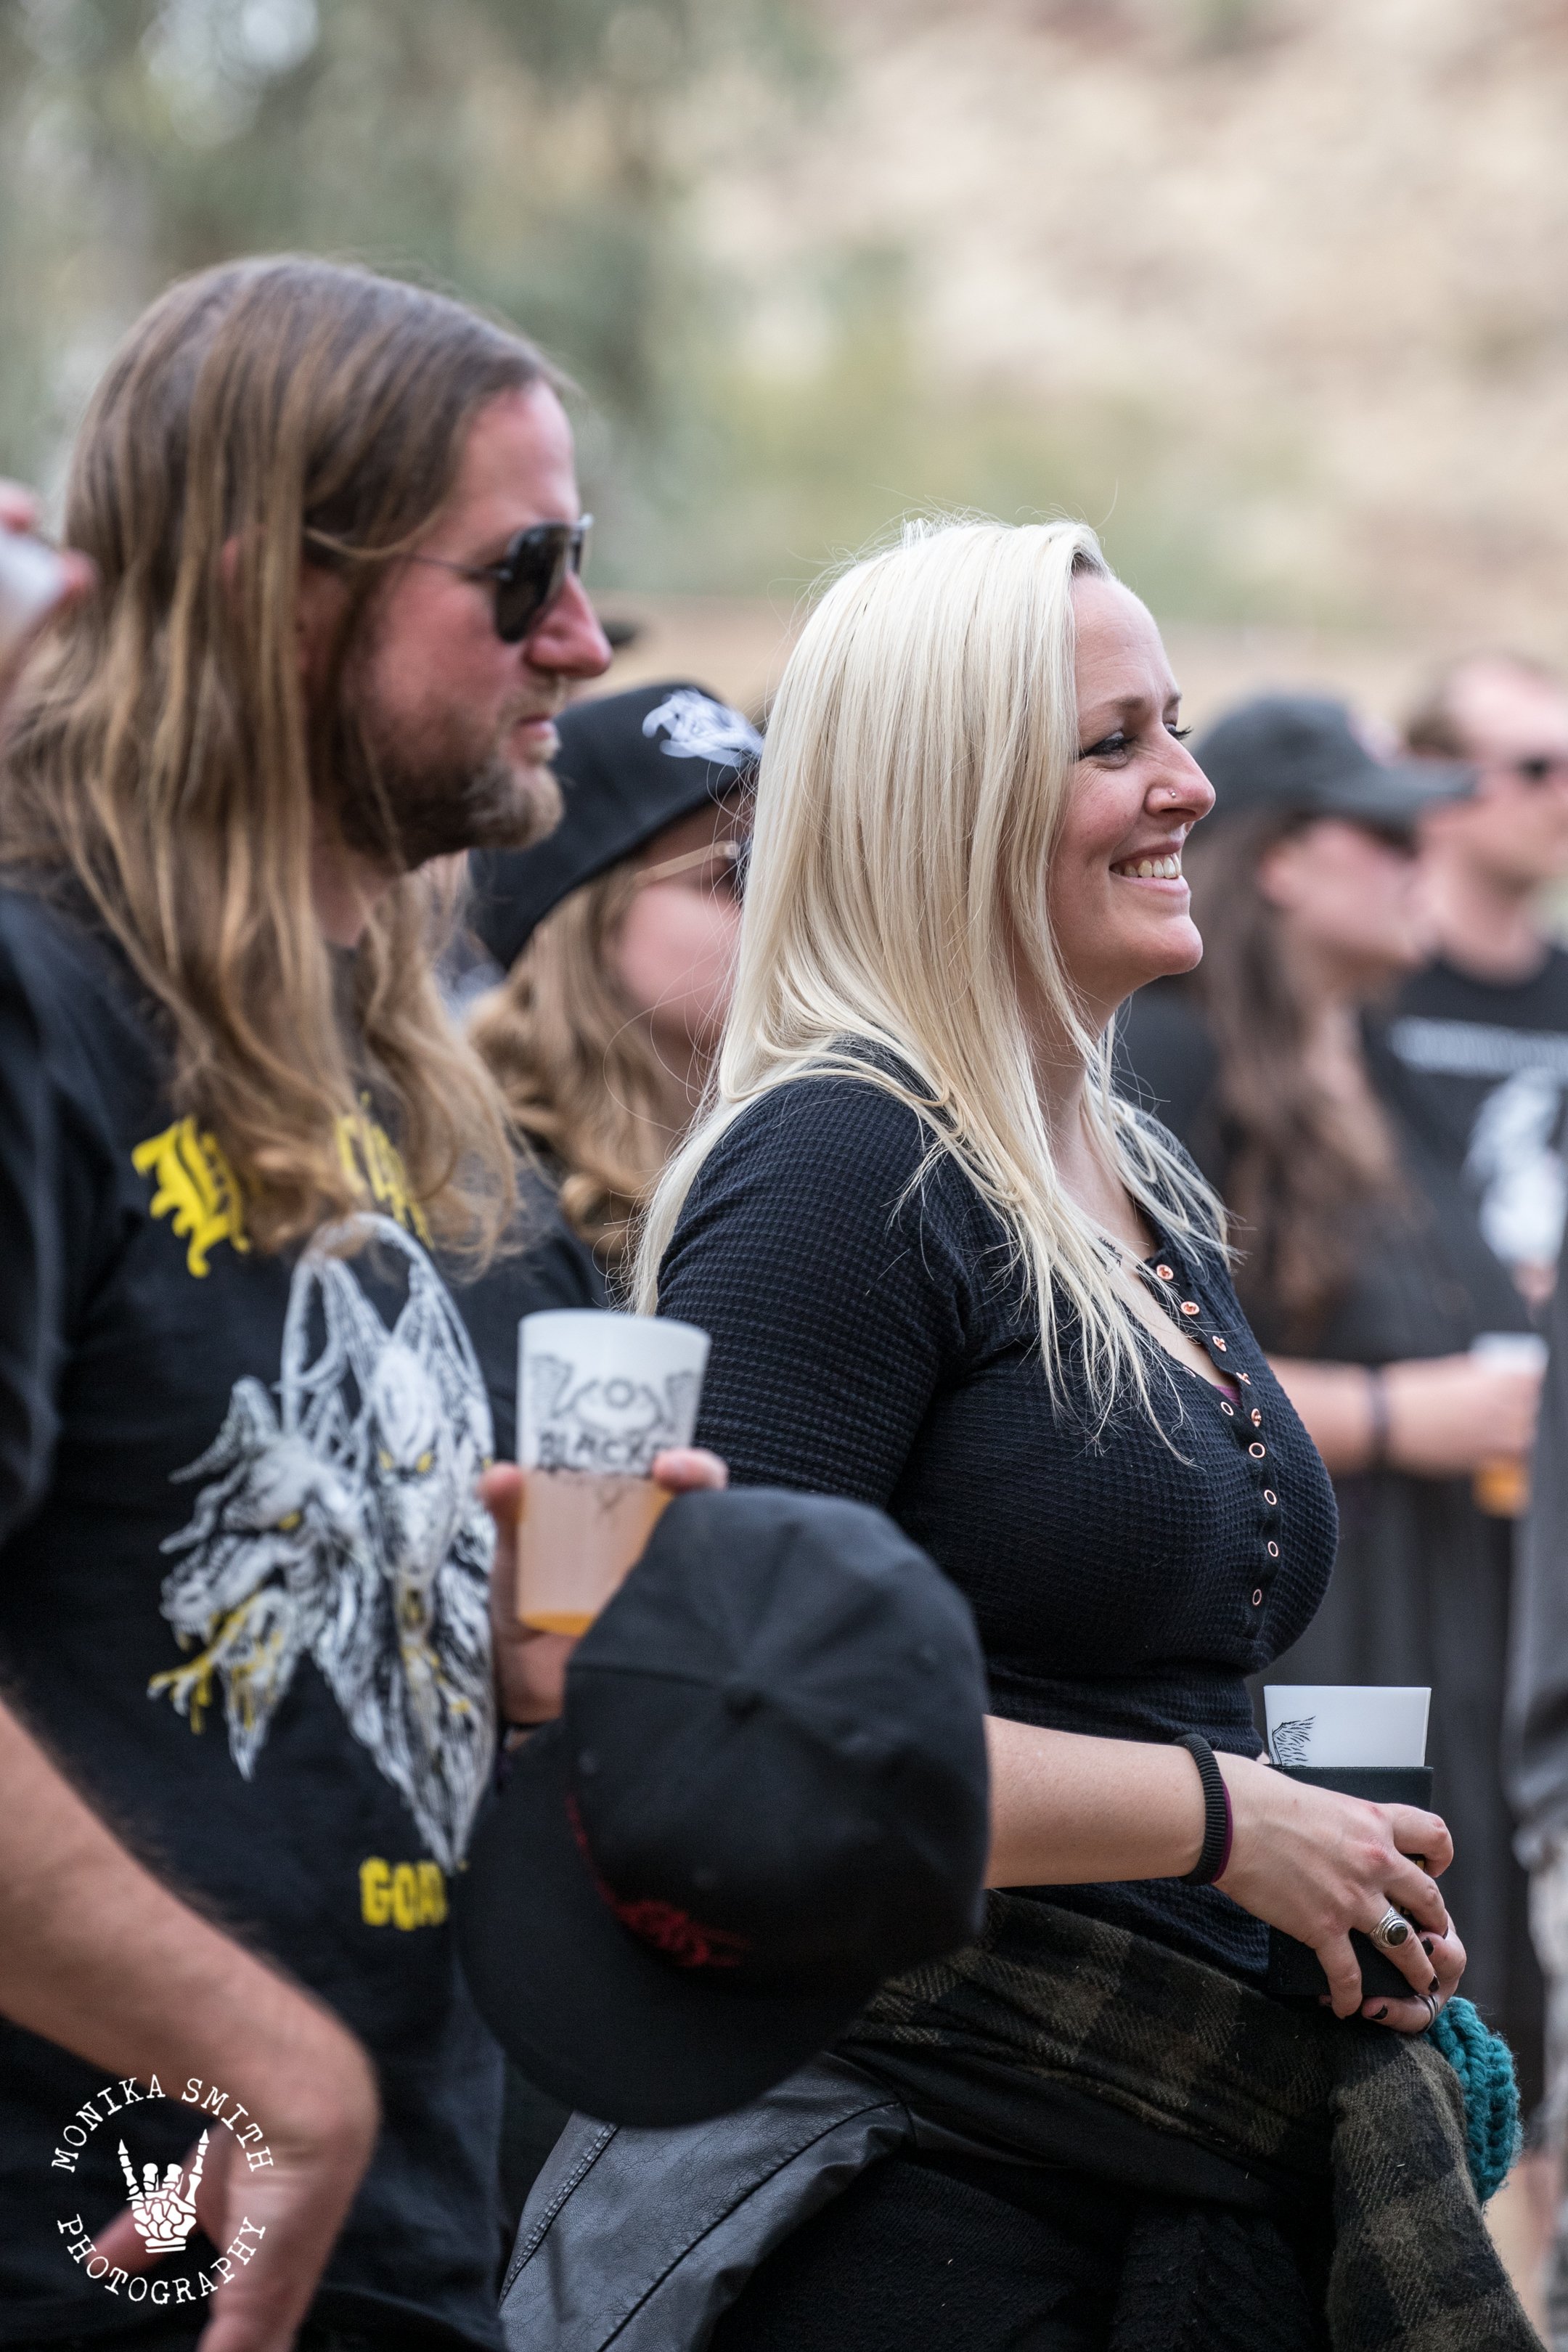 BLACKEN OPEN AIR FACES IN THE CROWD (7 of 31).jpg